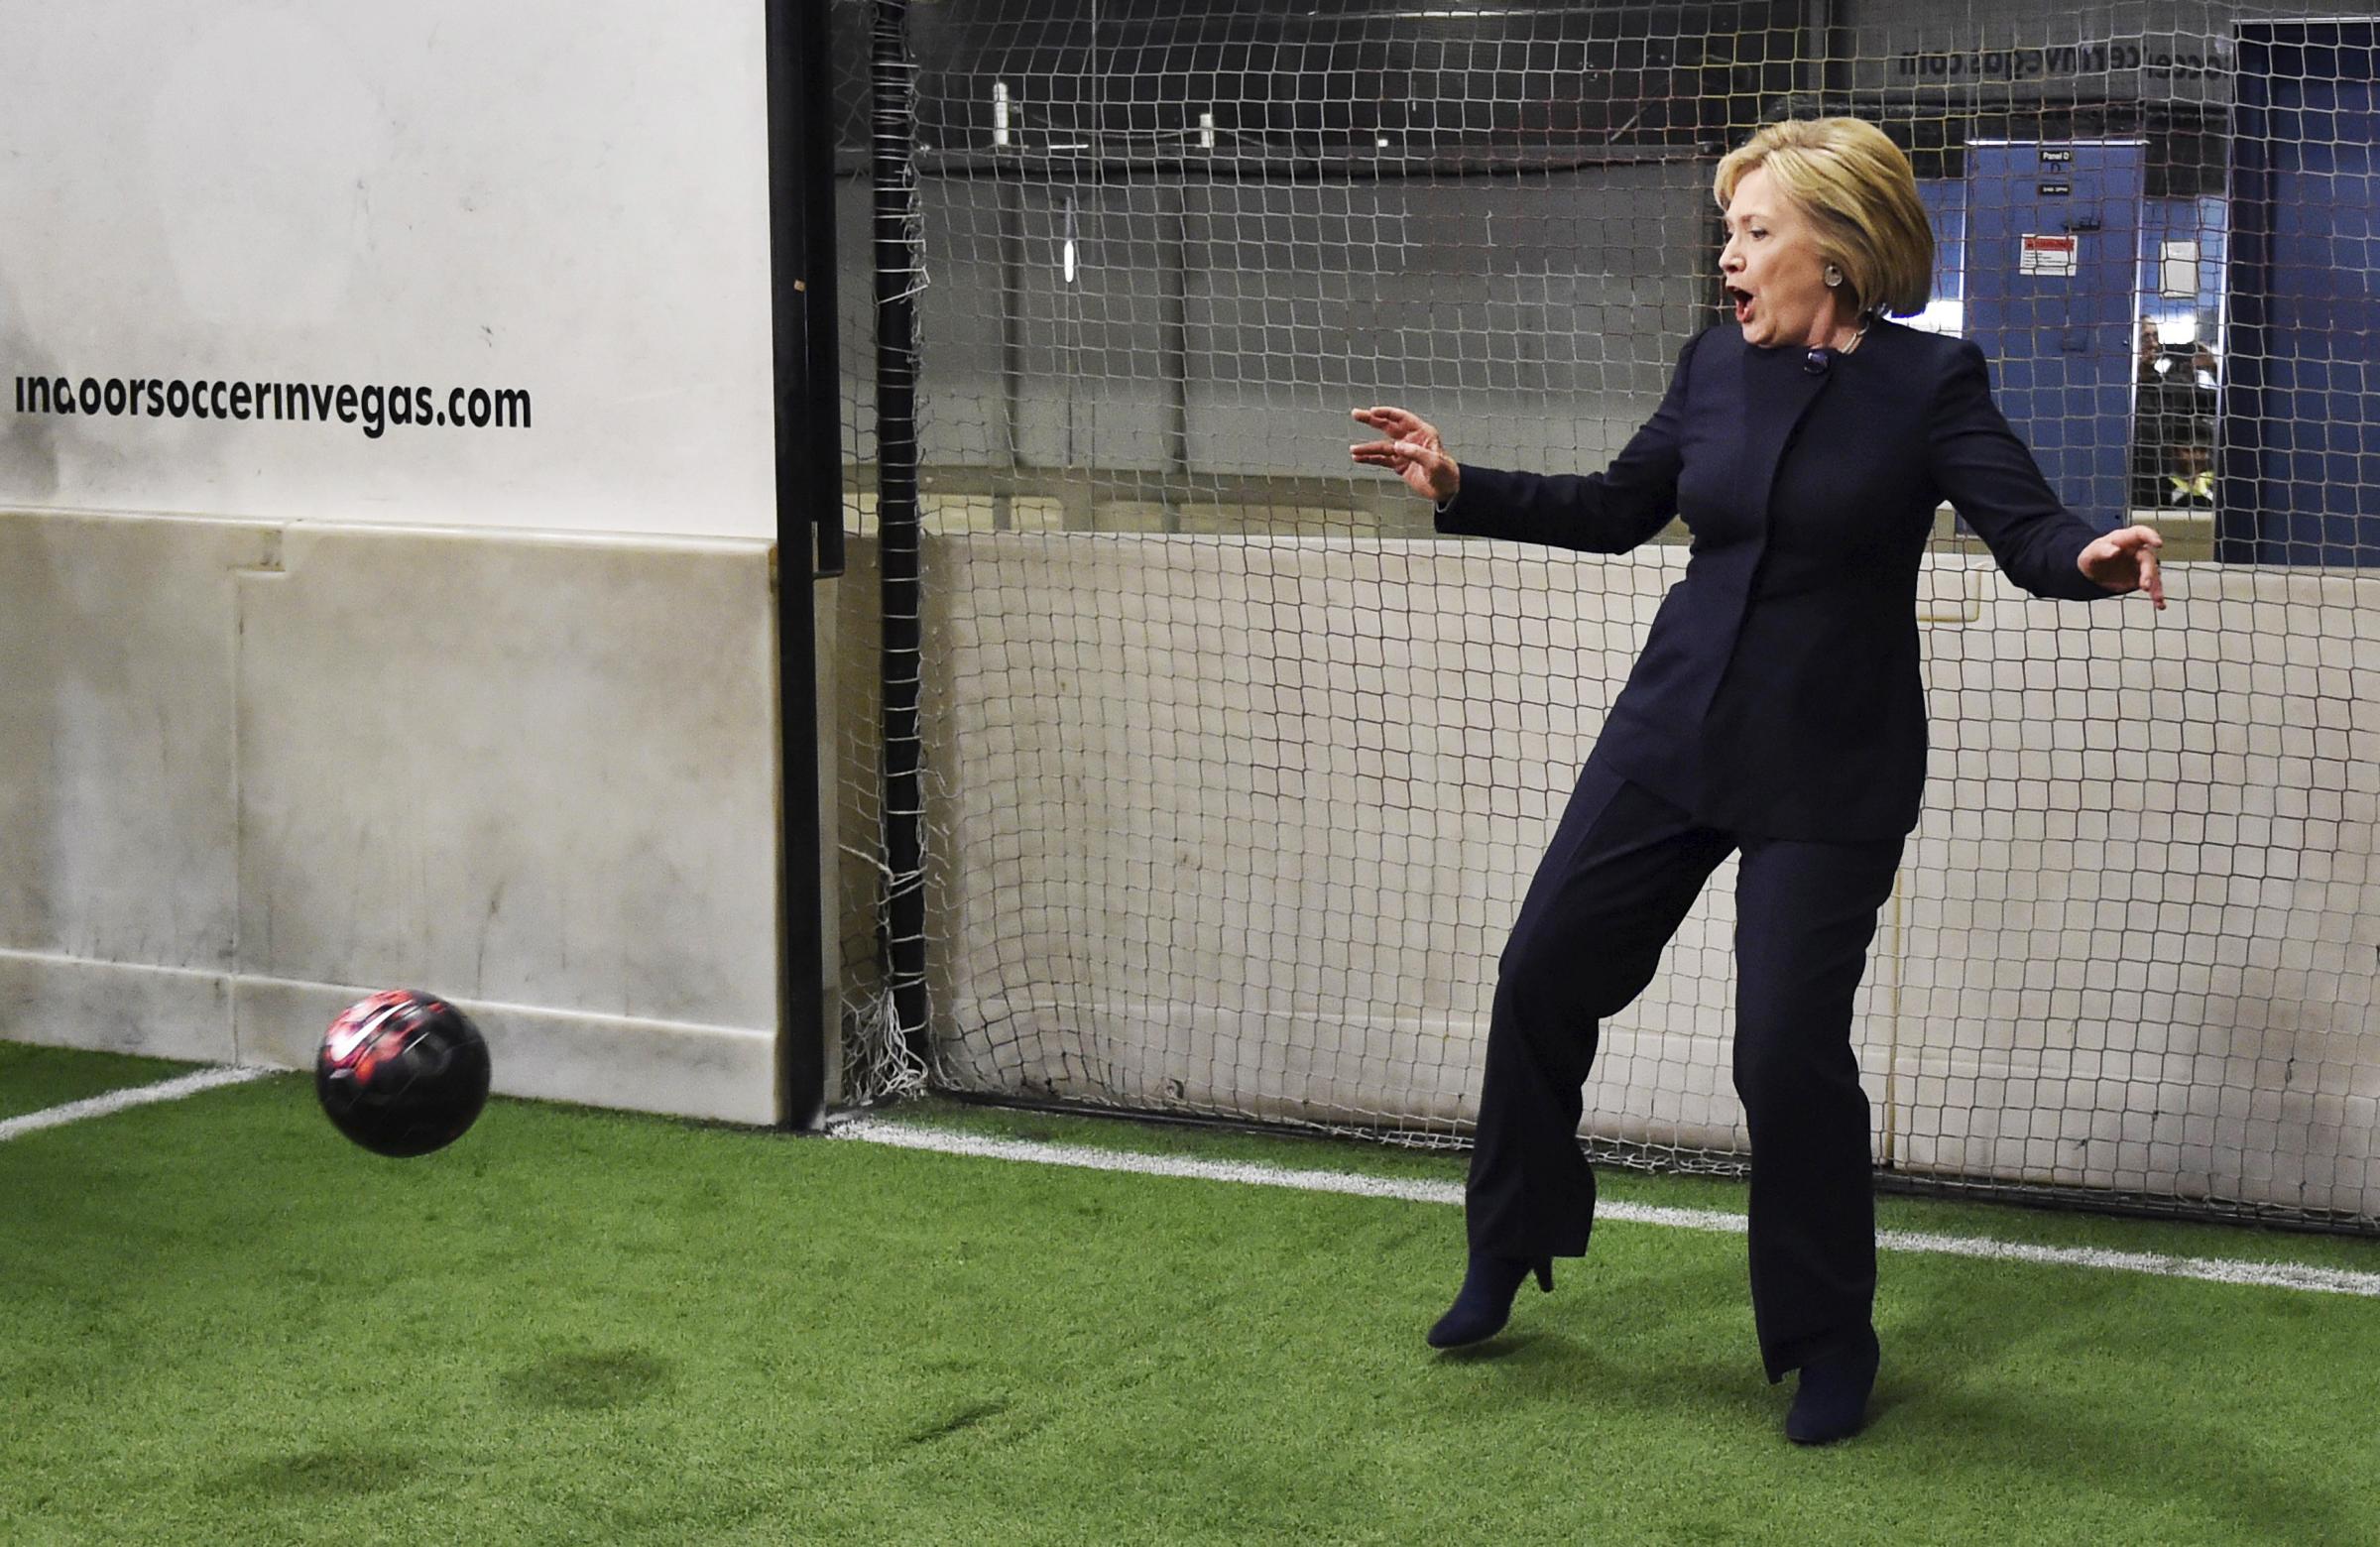 Democratic presidential candidate Hillary Clinton defends a goal during a campaign stop at an indoor soccer center in Las Vegas on Feb. 13, 2016.